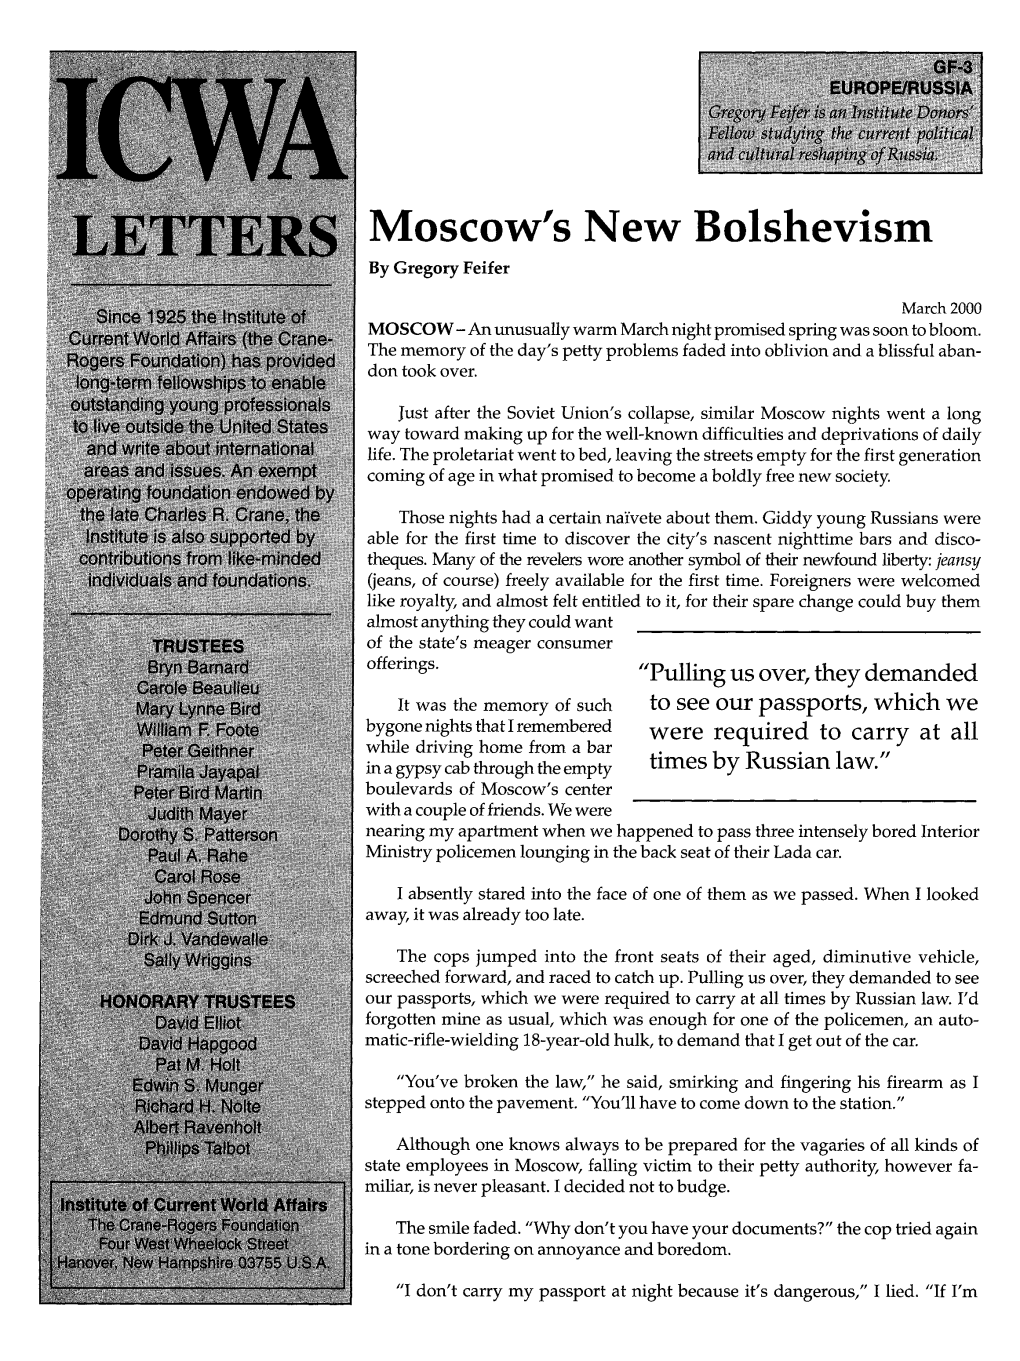 Moscow's New Bolshevism by Gregory Feifer